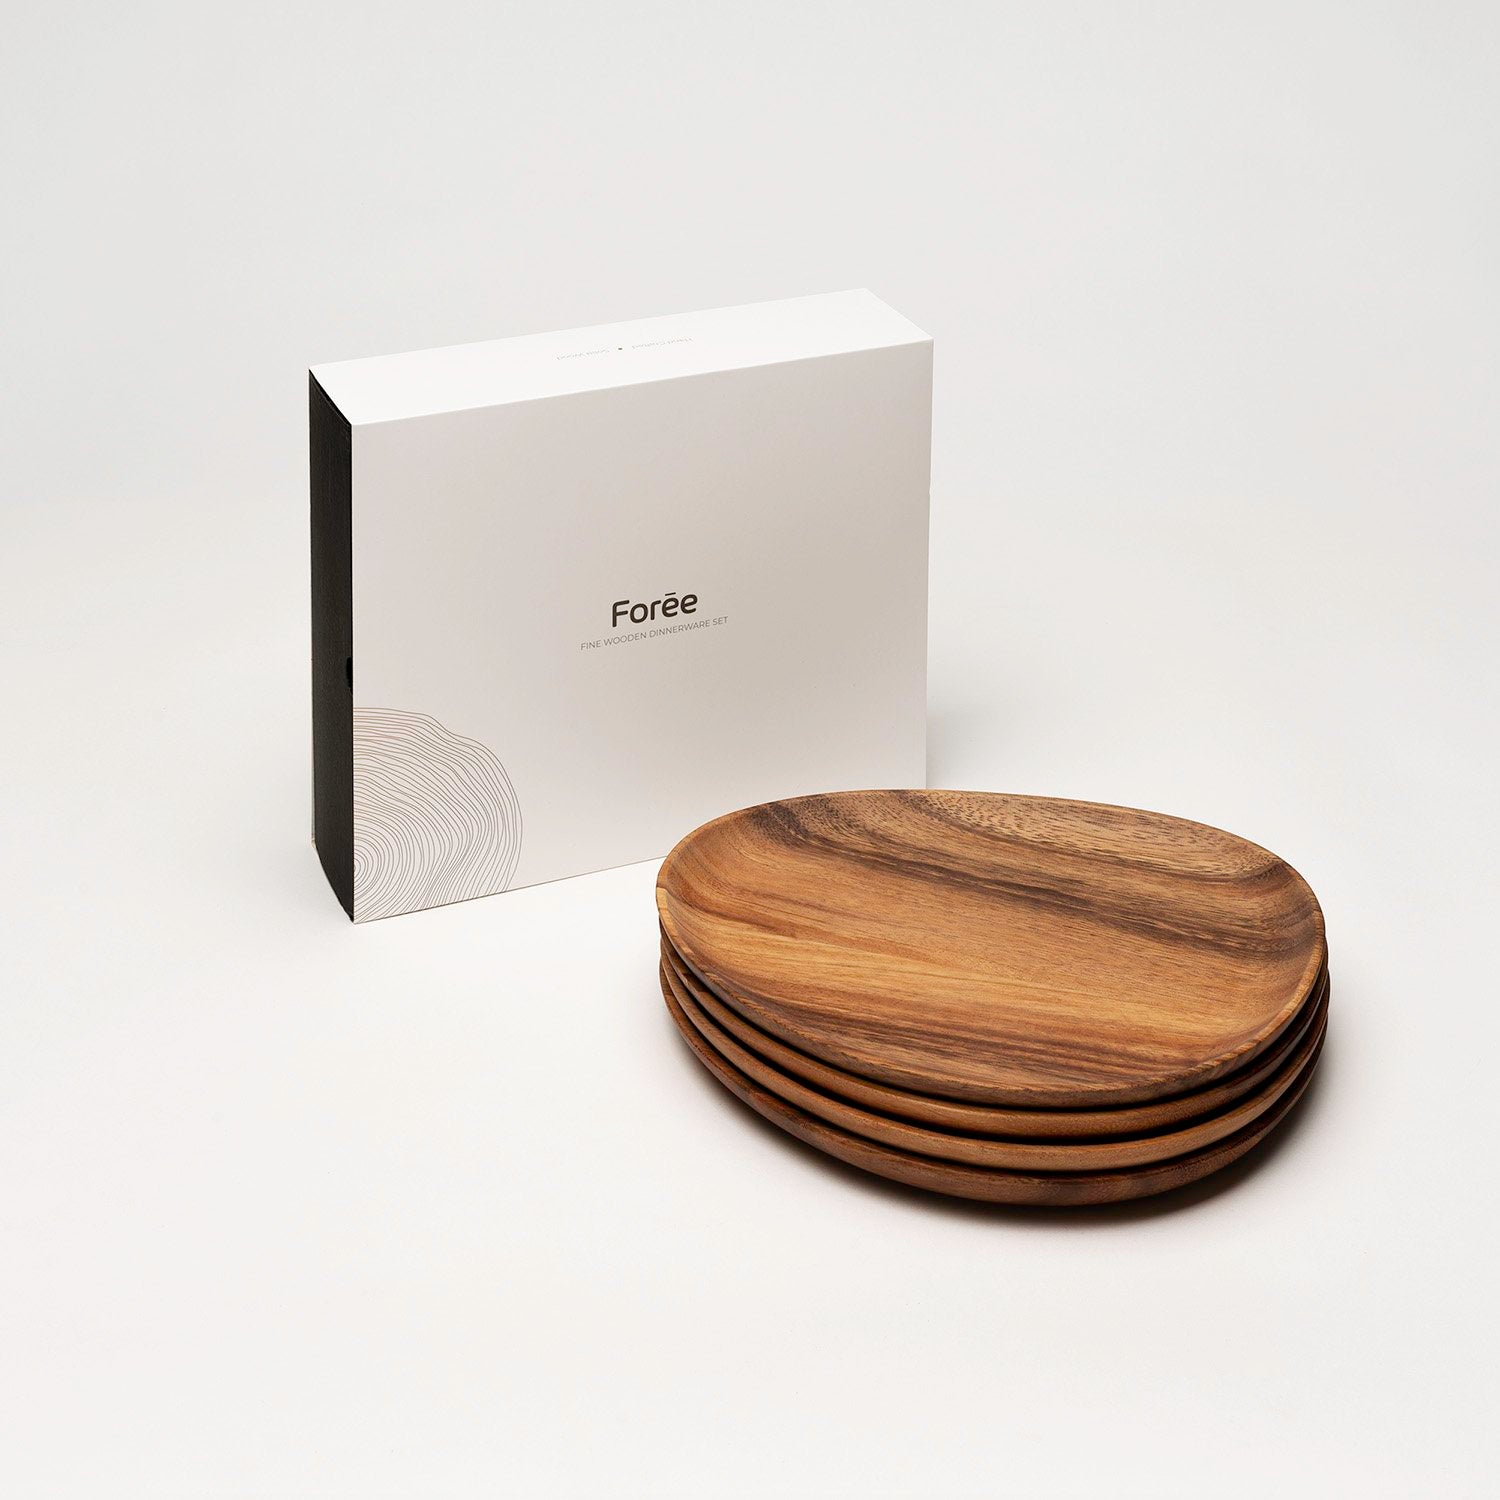 Four wooden plates stacked